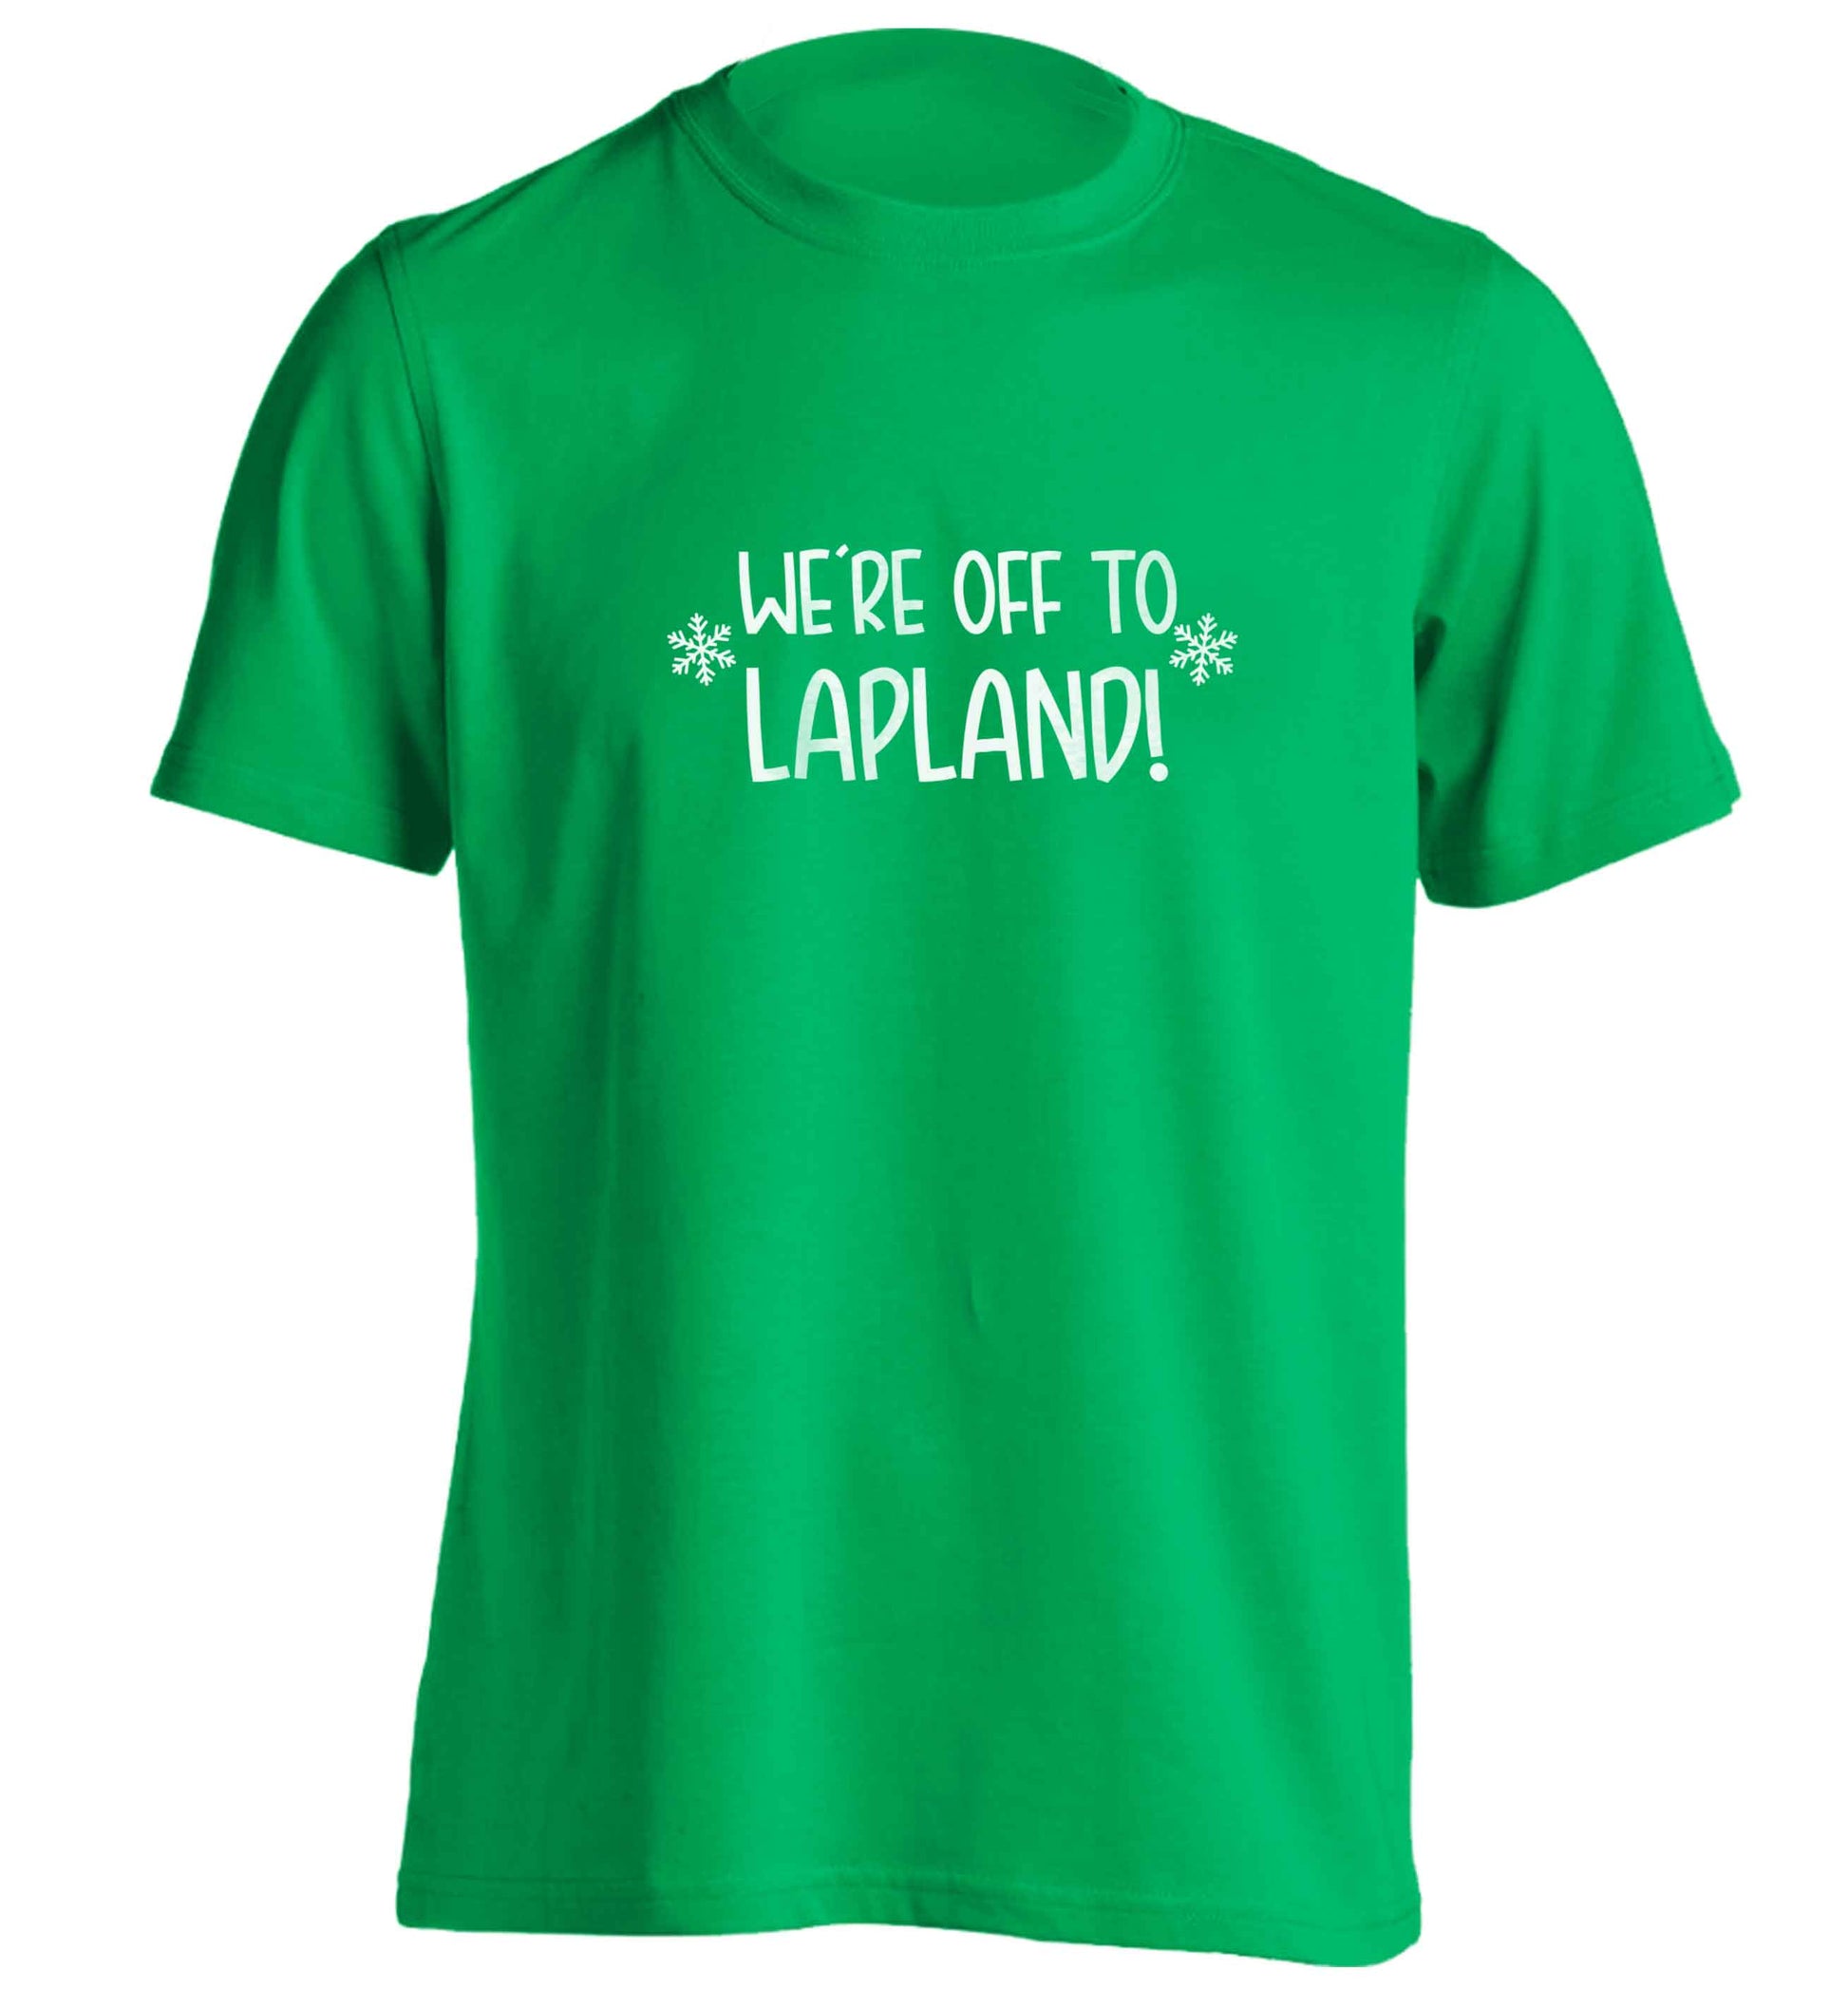 We're off to Lapland adults unisex green Tshirt 2XL